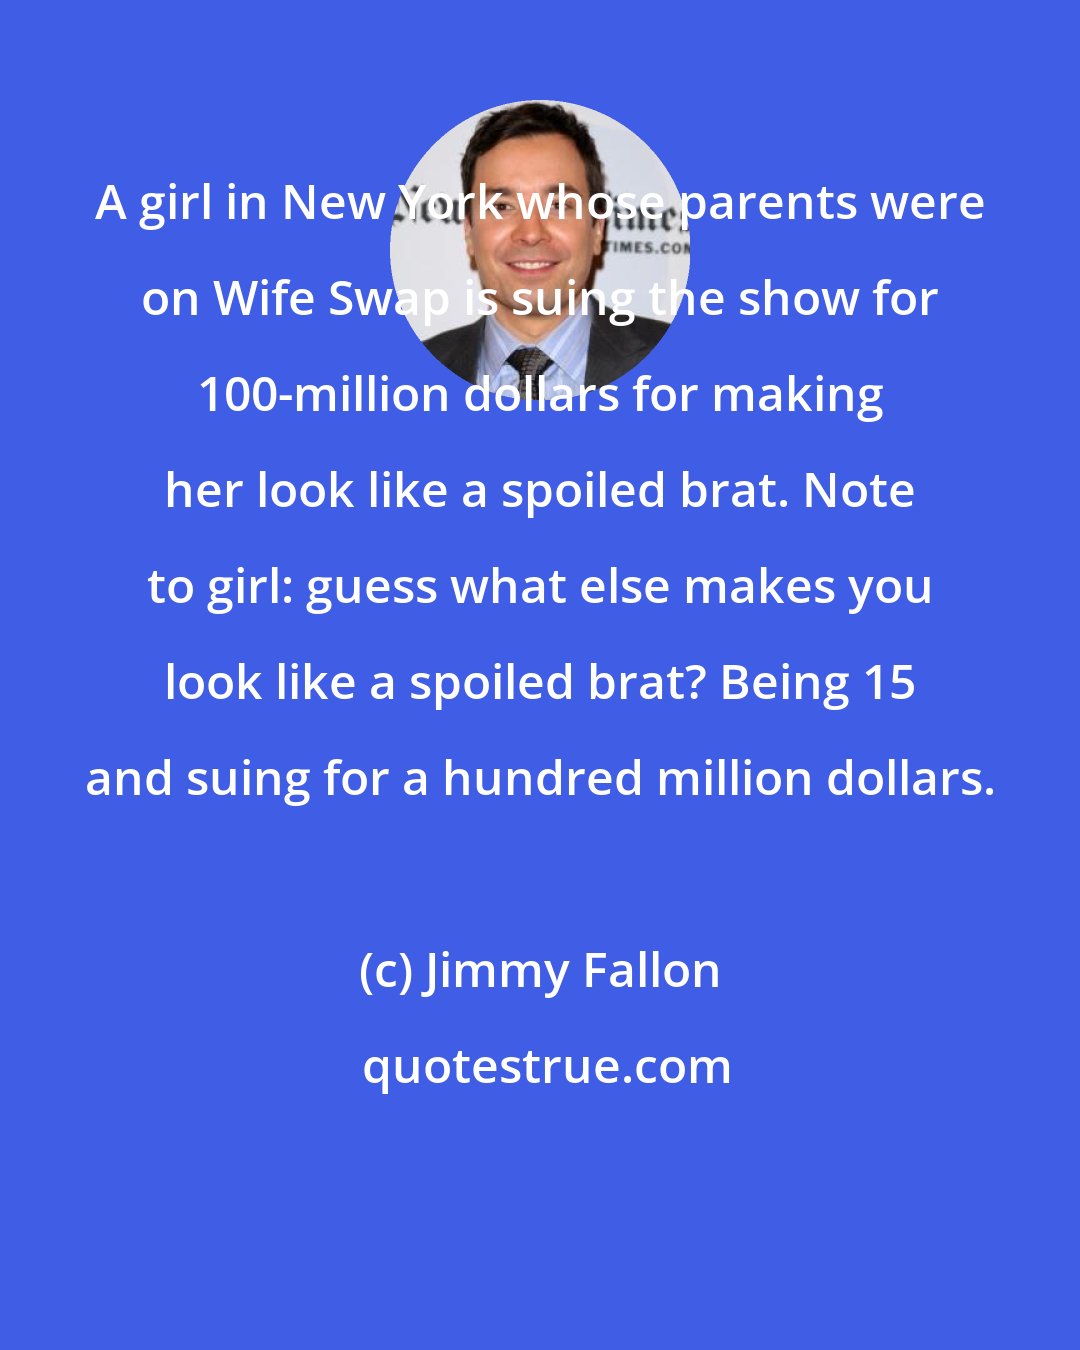 Jimmy Fallon: A girl in New York whose parents were on Wife Swap is suing the show for 100-million dollars for making her look like a spoiled brat. Note to girl: guess what else makes you look like a spoiled brat? Being 15 and suing for a hundred million dollars.